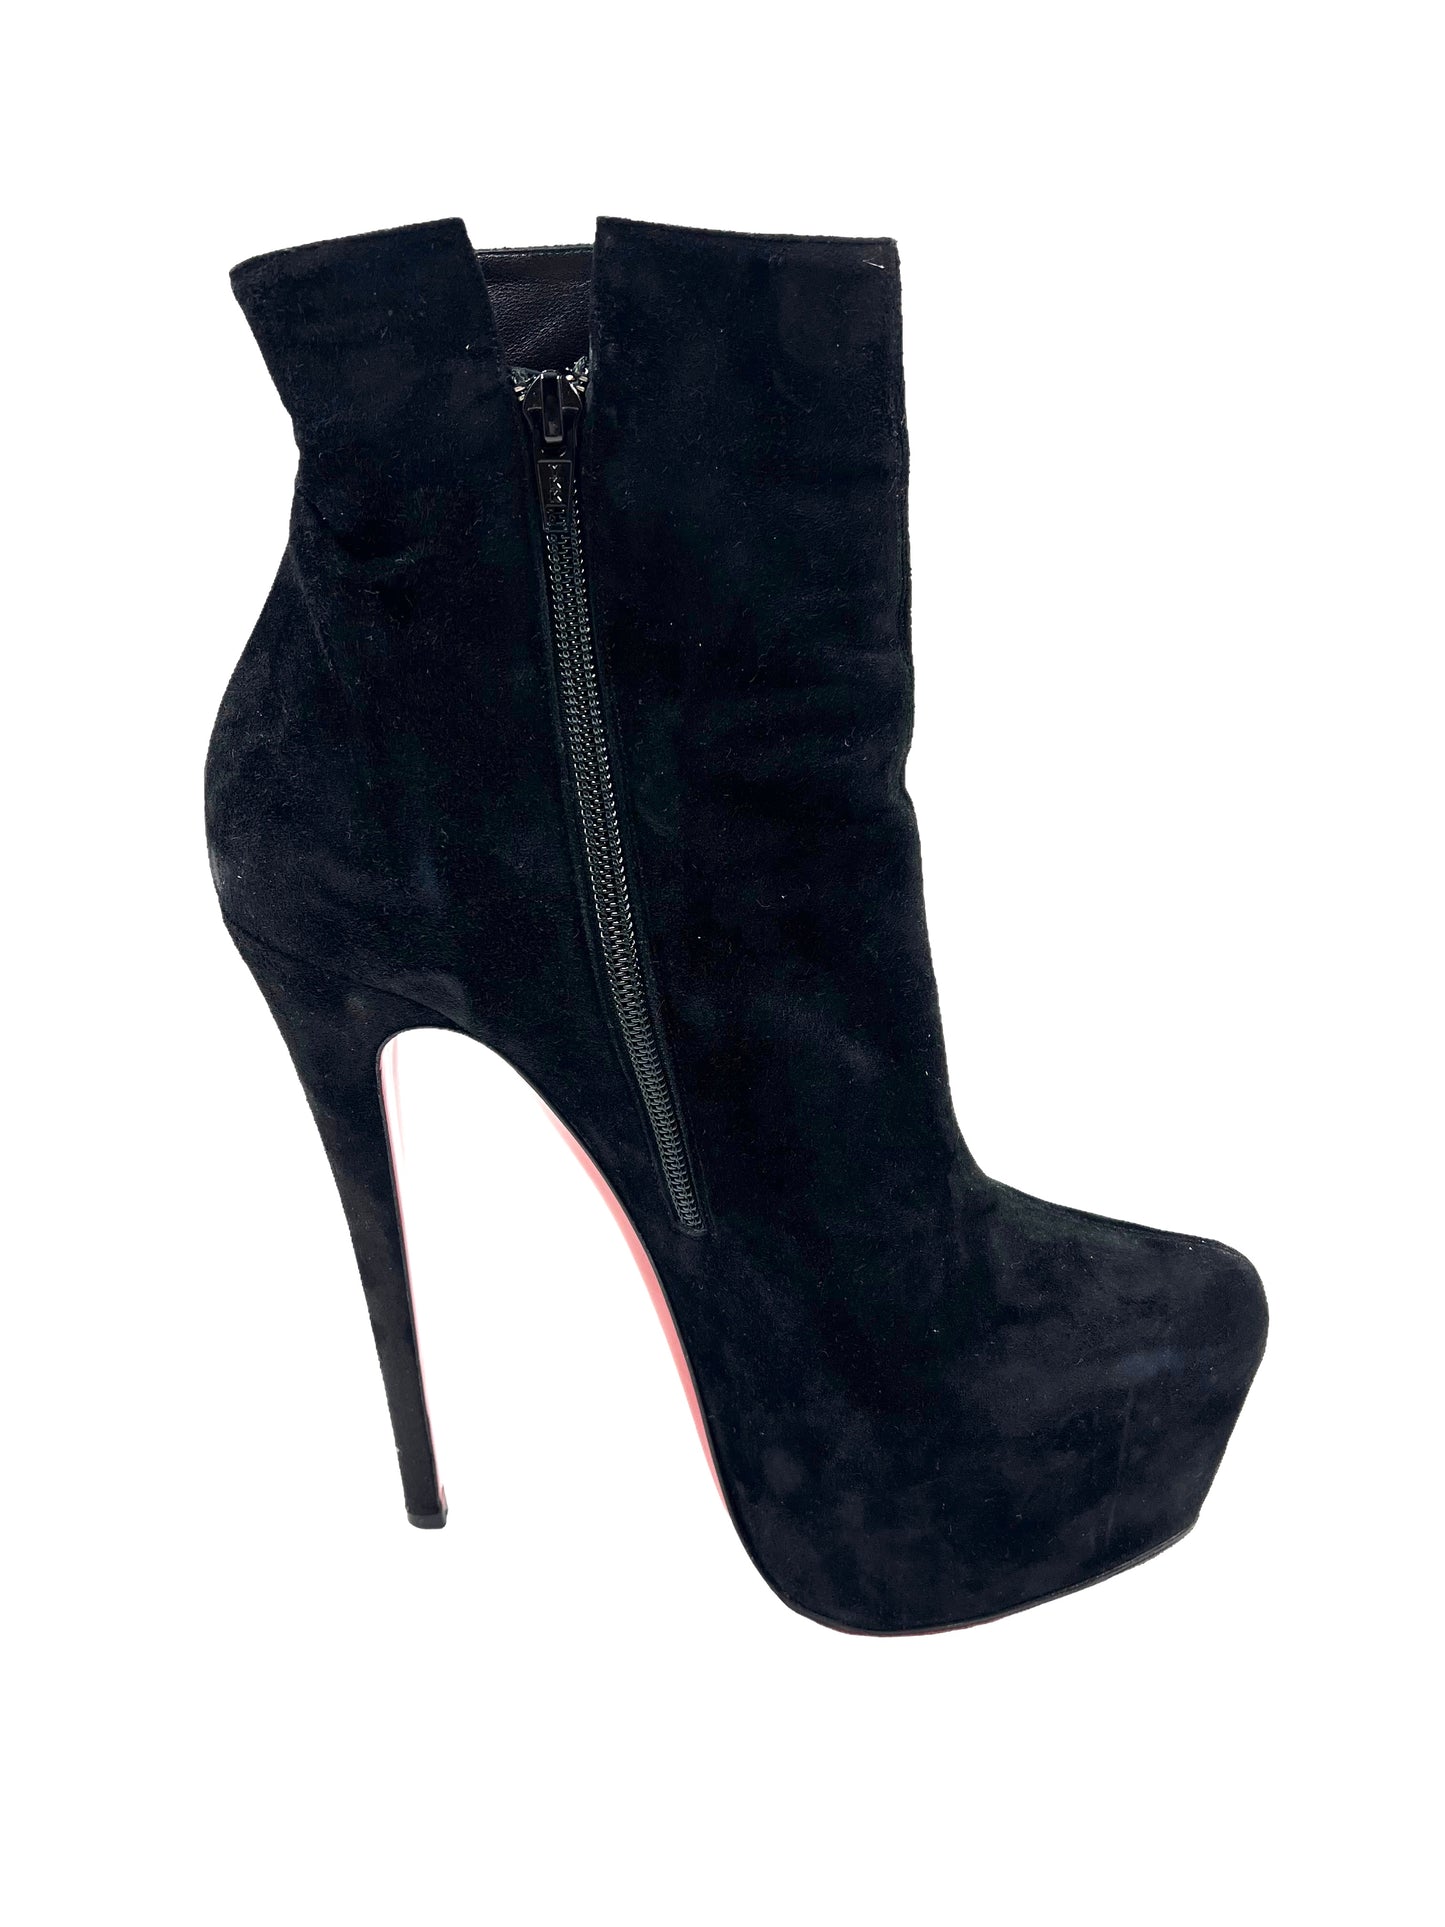 Christian Louboutin Size 40 Black Suede Daf Booty 160 Booties